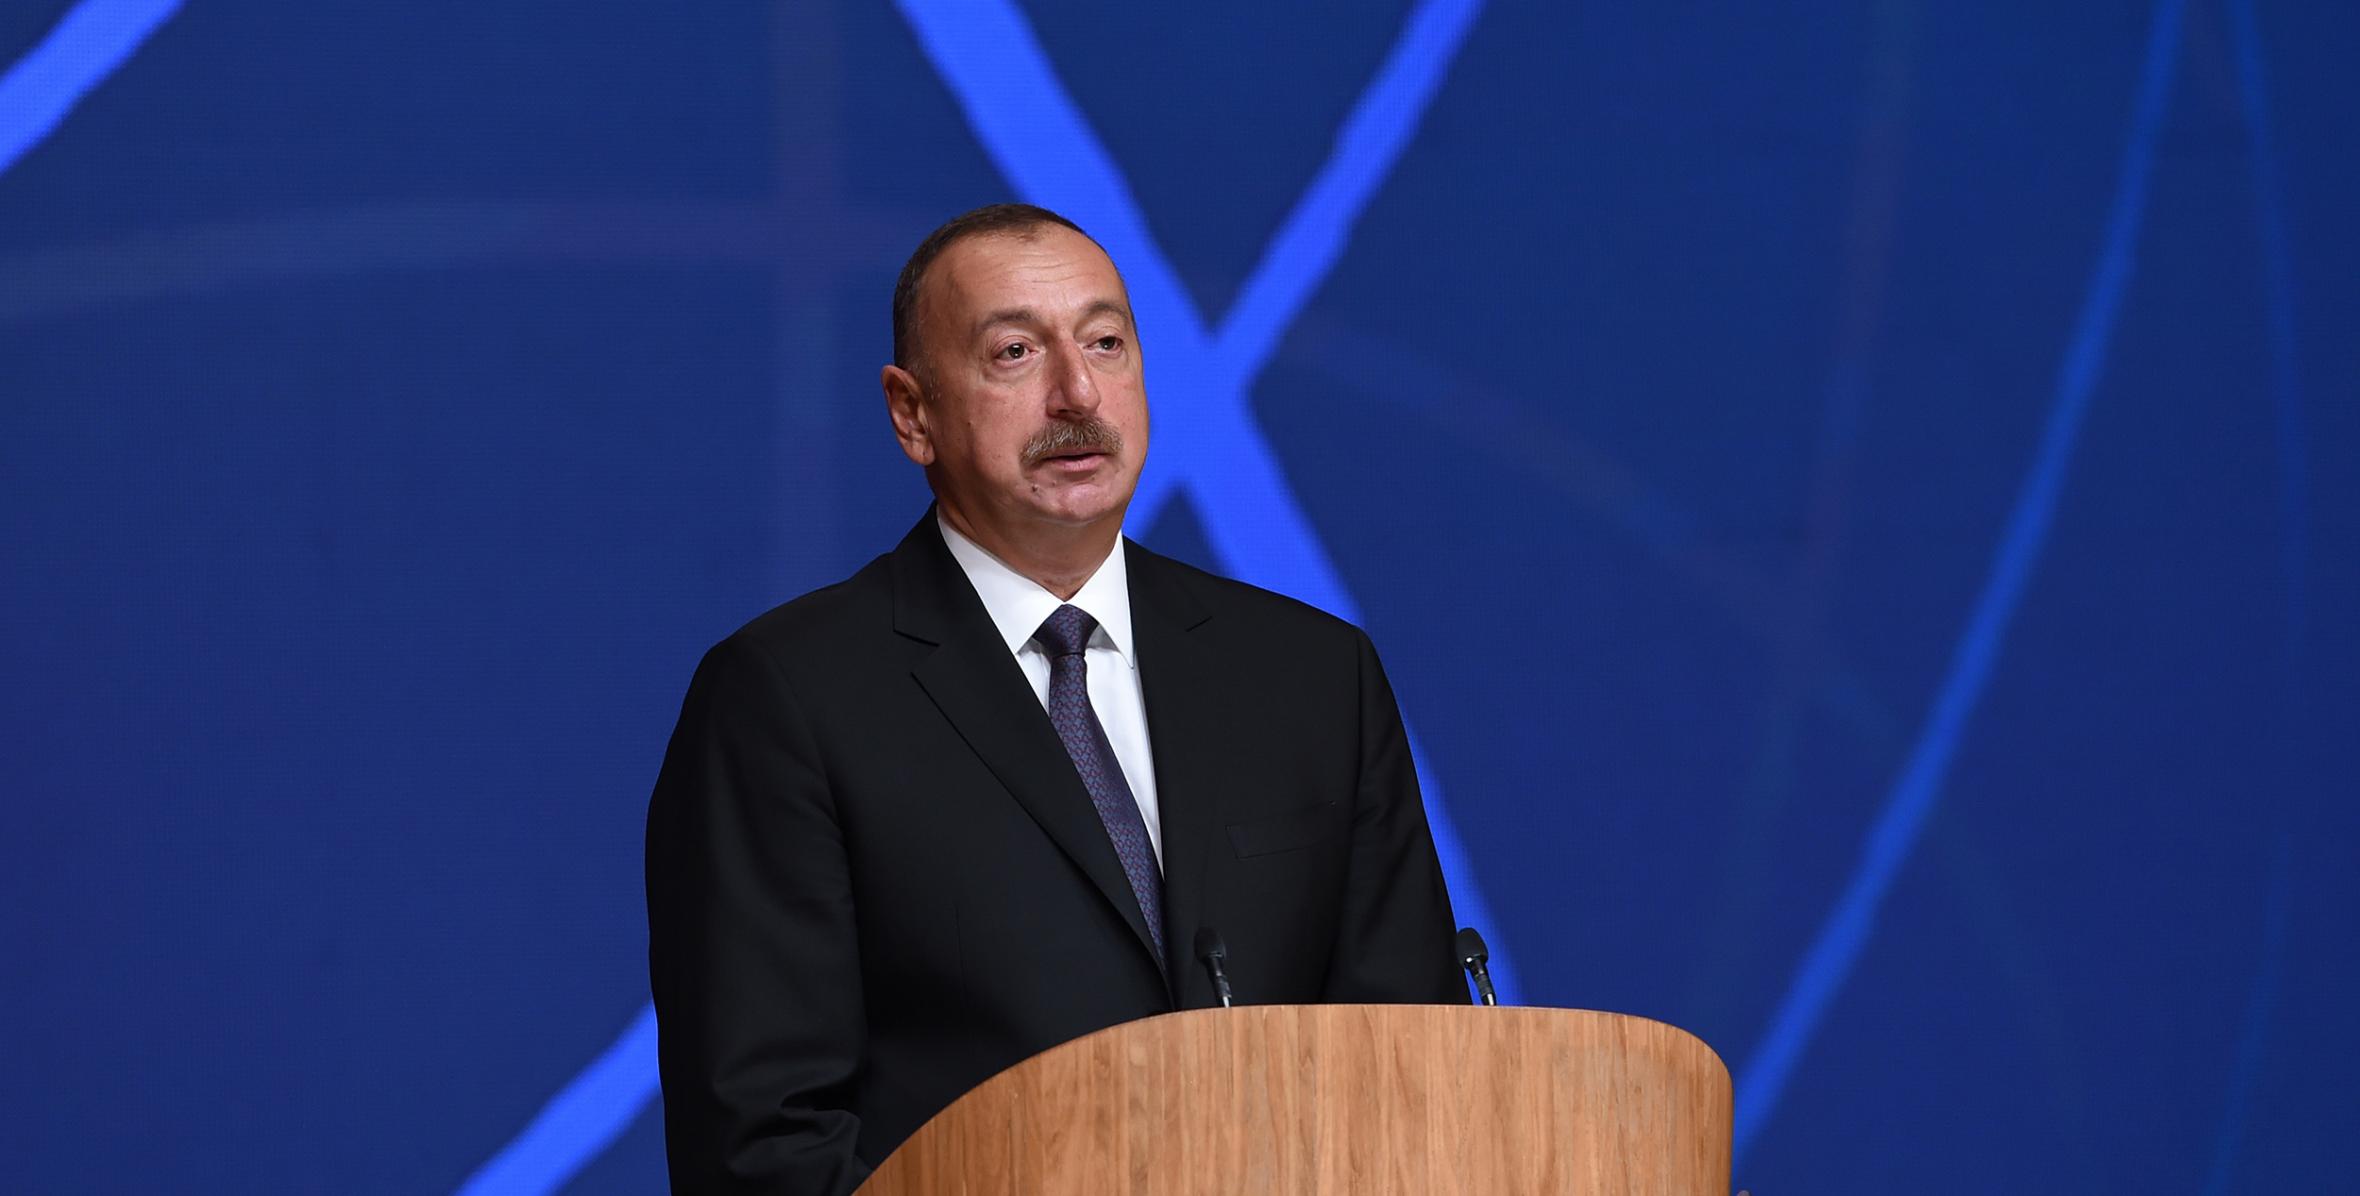 Speech by Ilham Aliyev at the opening of 5th News Agencies World Congress